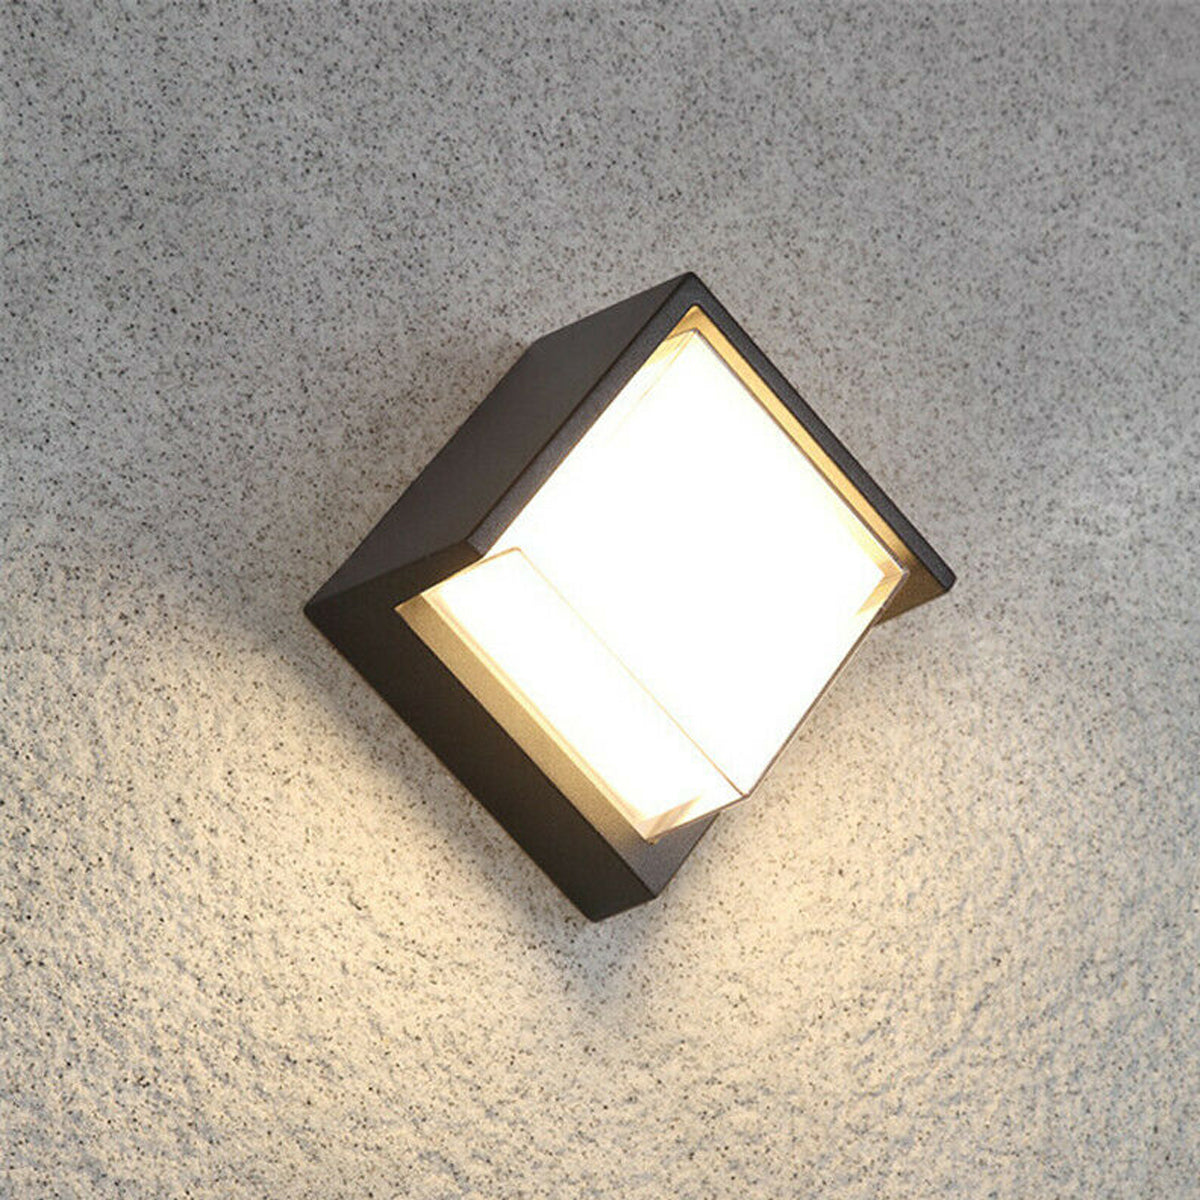 Sophia black and white square wall light is an modern simple fitting with a black polycarbonate body and opal diffuser. This stylish wall light is perfect for adding a pinch of modern flavour to doorways, sheds, patios, porch, driveways, garages, sheds, and more. This fitting is IP65 rated which makes it fully weatherproof light fitting.